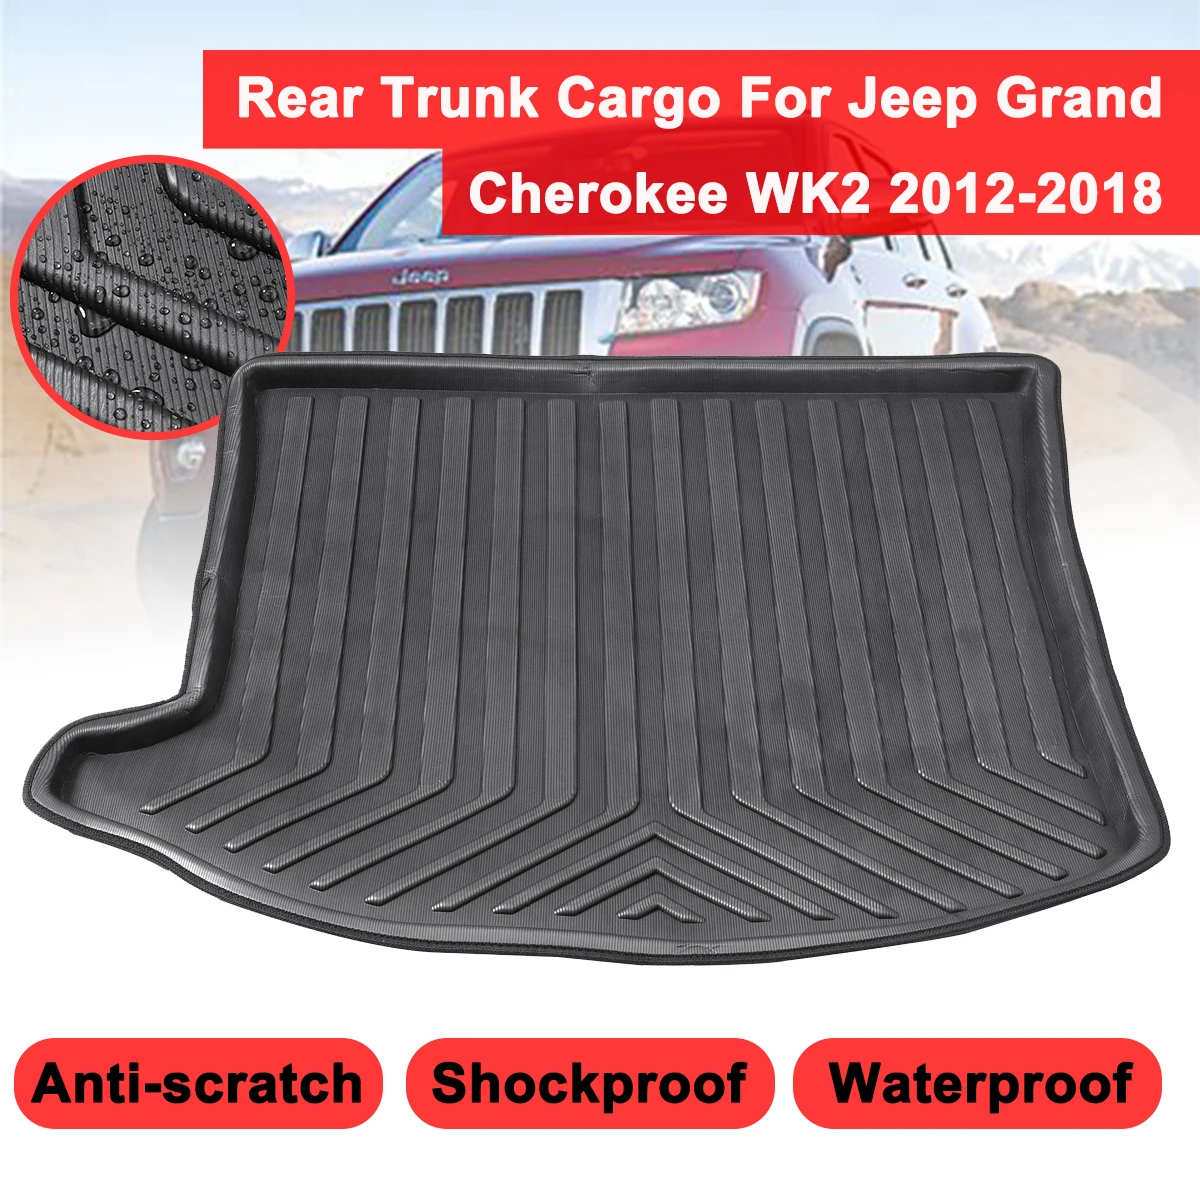 For Jeep Grand Cherokee WK2 2012 2013 2014-2018 Boot Mat Rear Trunk Liner Cargo Floor Tray Carpet Mud PadKick Guard Protector